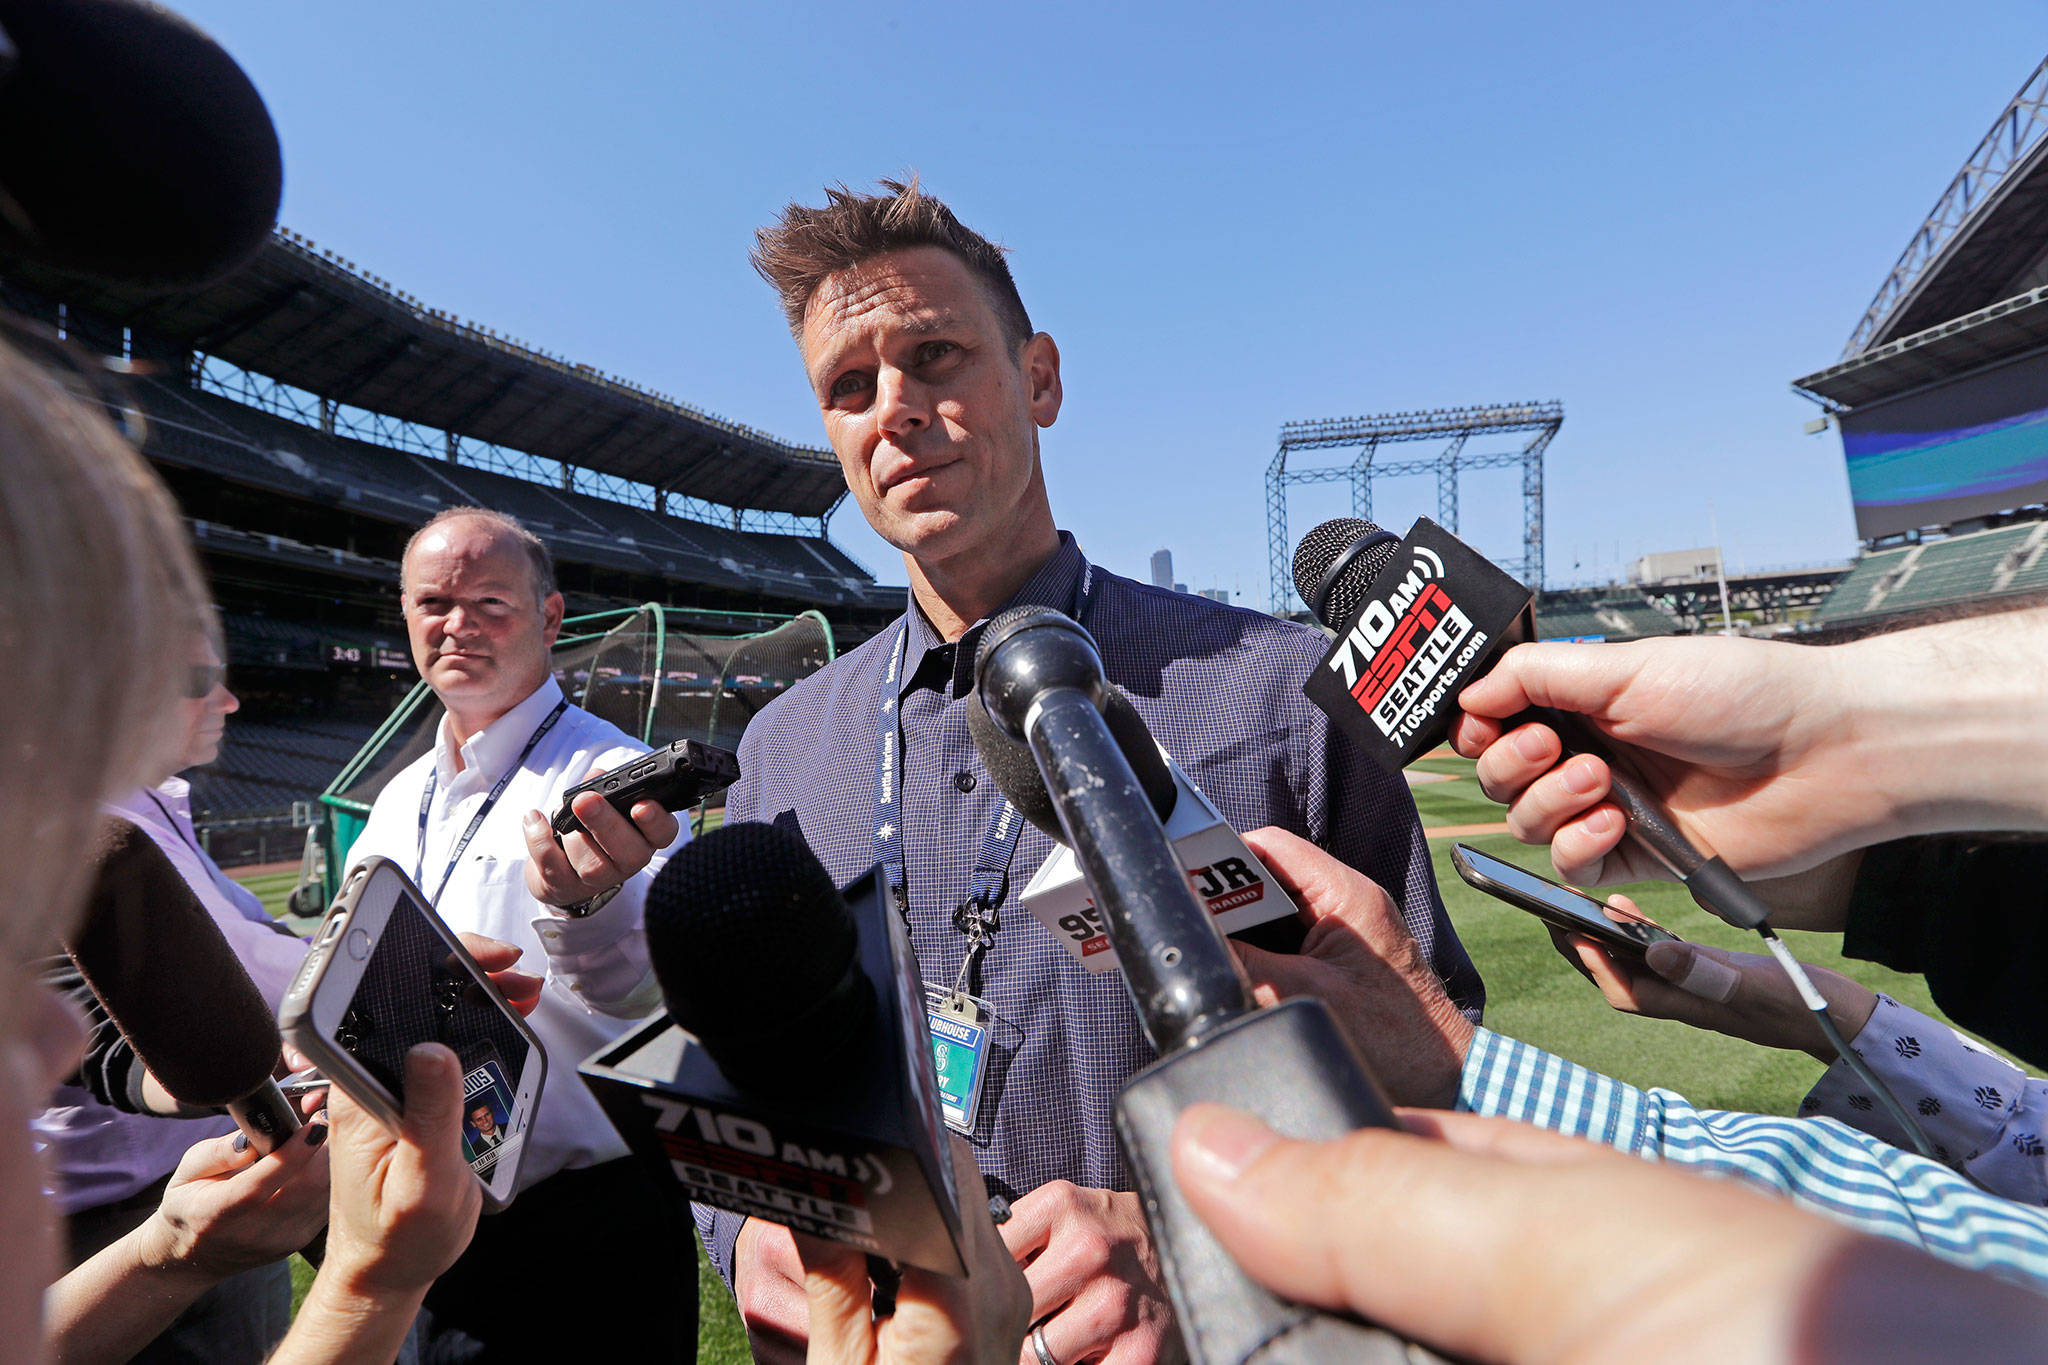 General manager Jerry Dipoto says players “should be insulted” by comments made by now former Mariners CEO Kevin Mather. (AP Photo/Elaine Thompson)